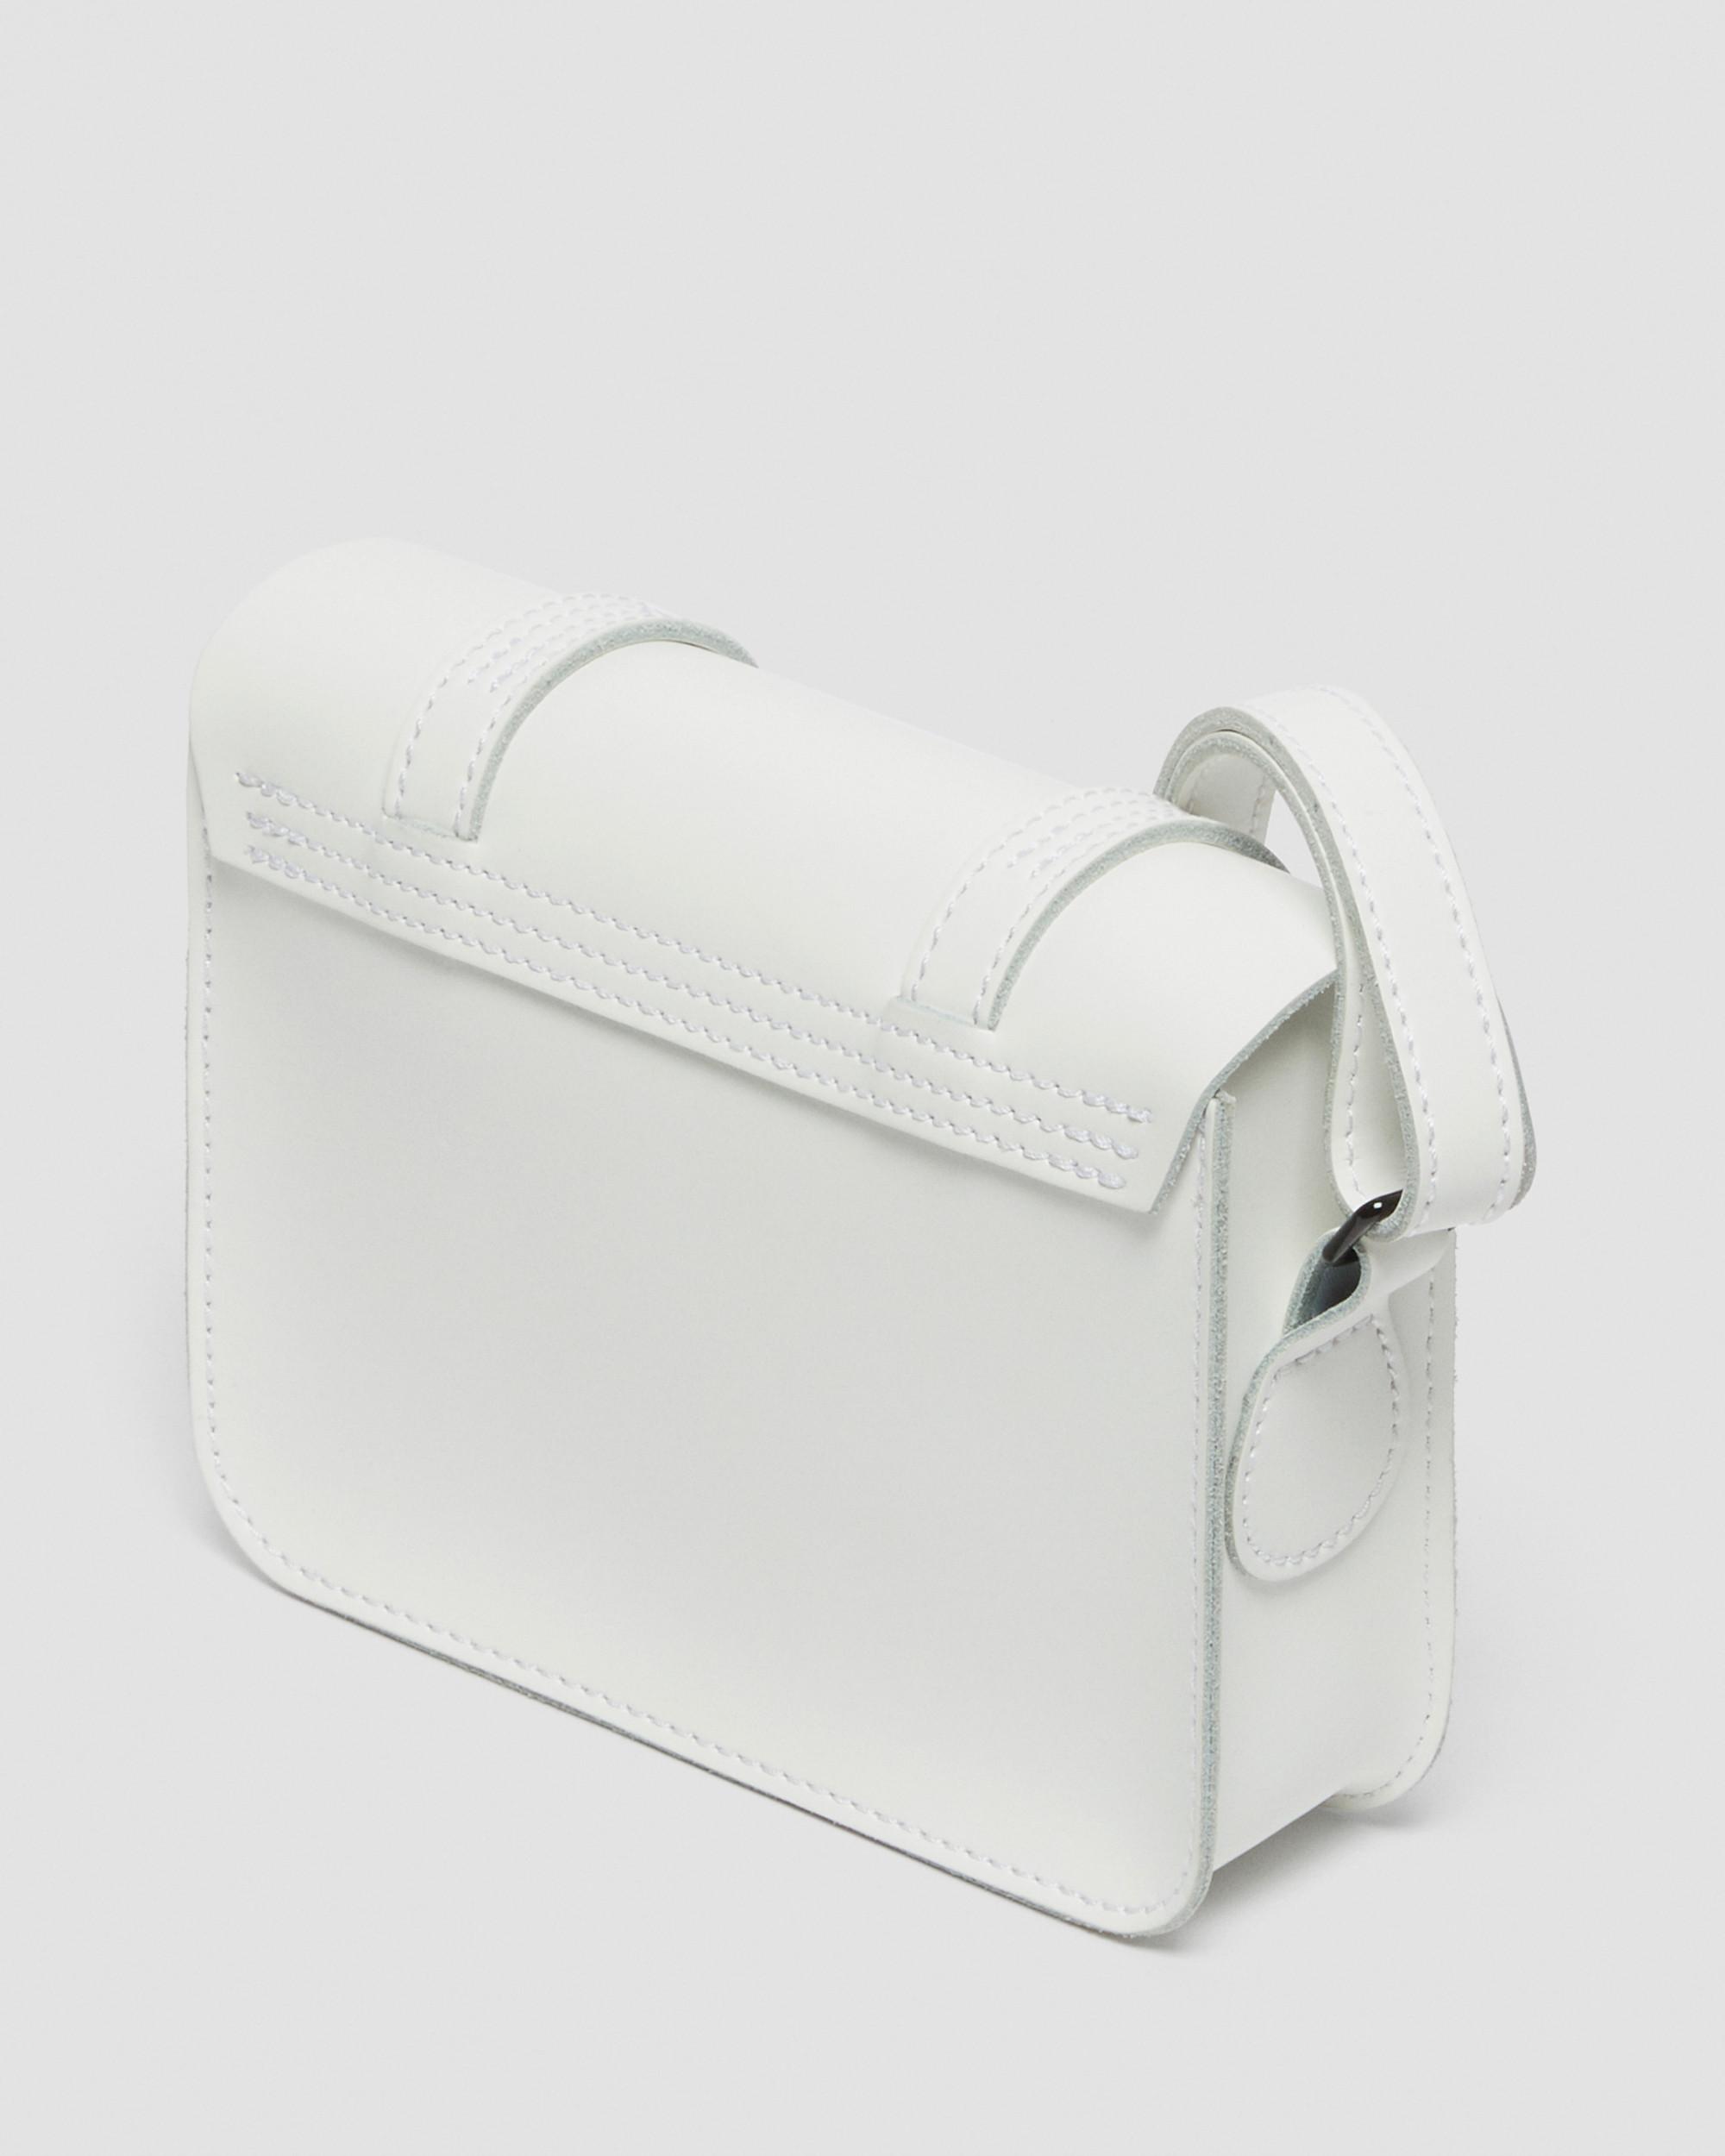 7 Inch Leather Crossbody Bag in White